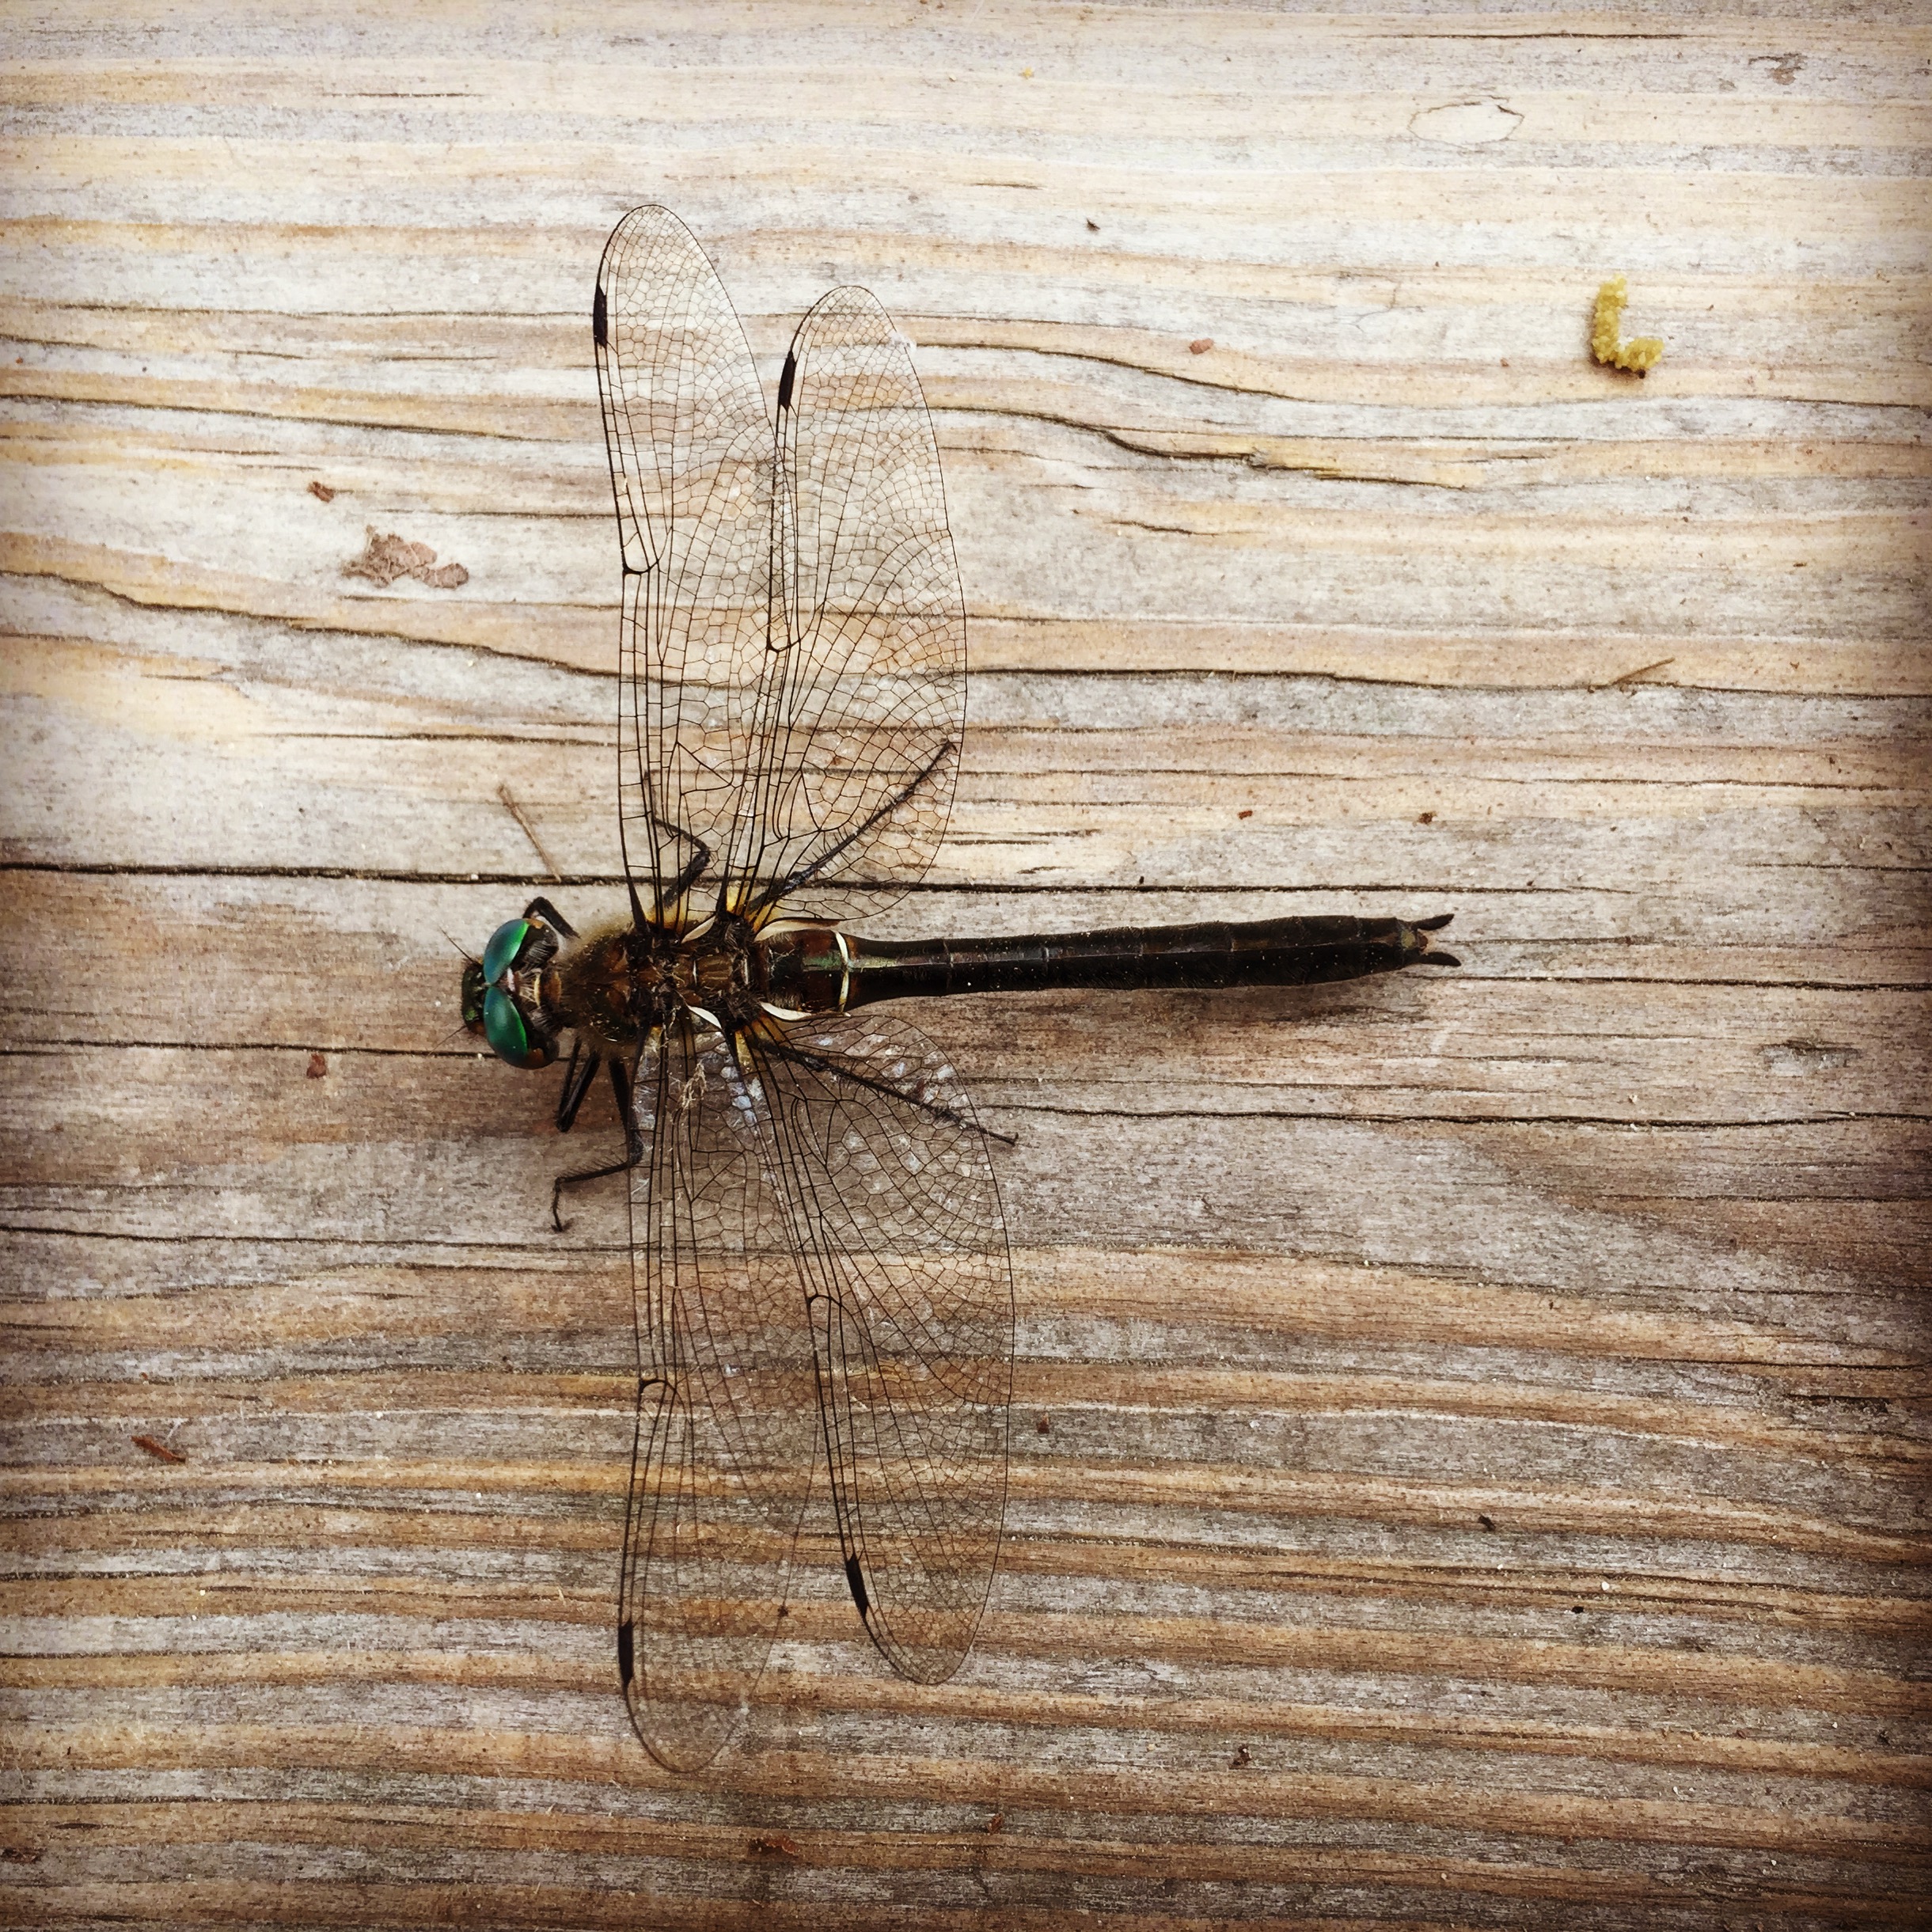  This dragonfly looked dead, and after photographing it, I went to pick it up and move it to the side of the trail, but it WAS NOT DEAD, only resting, and let me know by beating its wings rapidly against my hand. It was quite a shock! 